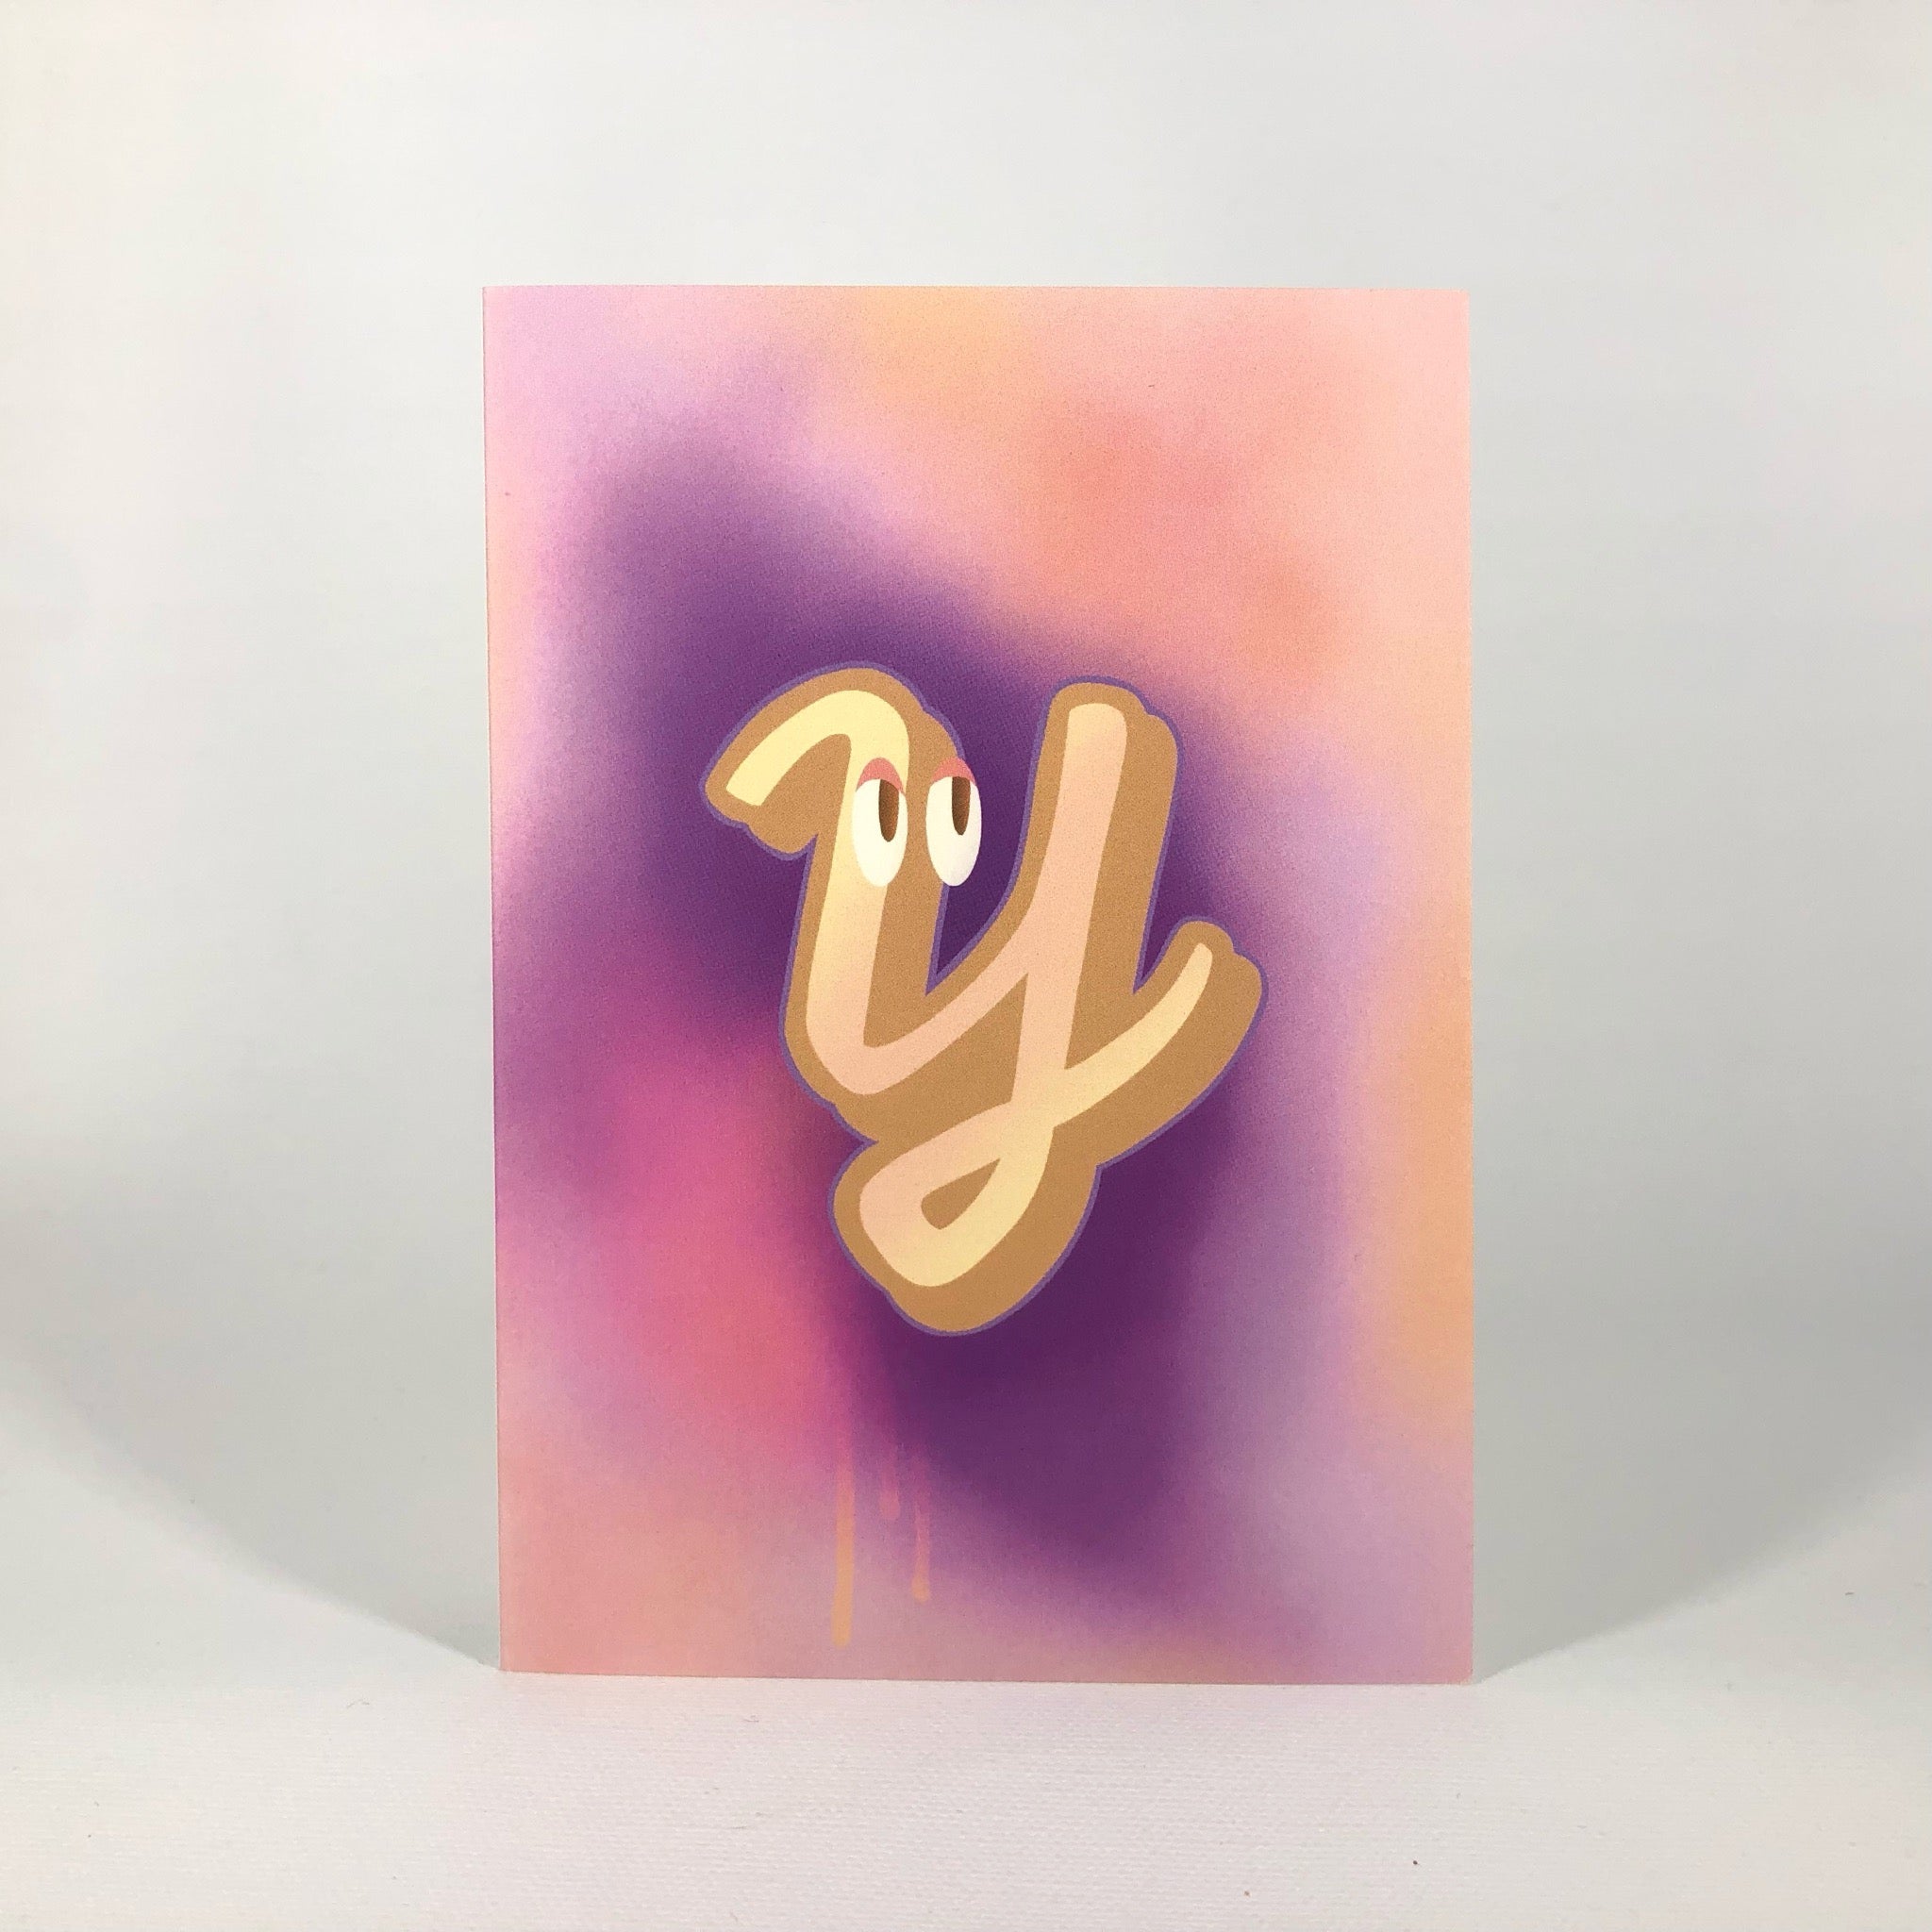 The Jolly Type Y Greeting Card